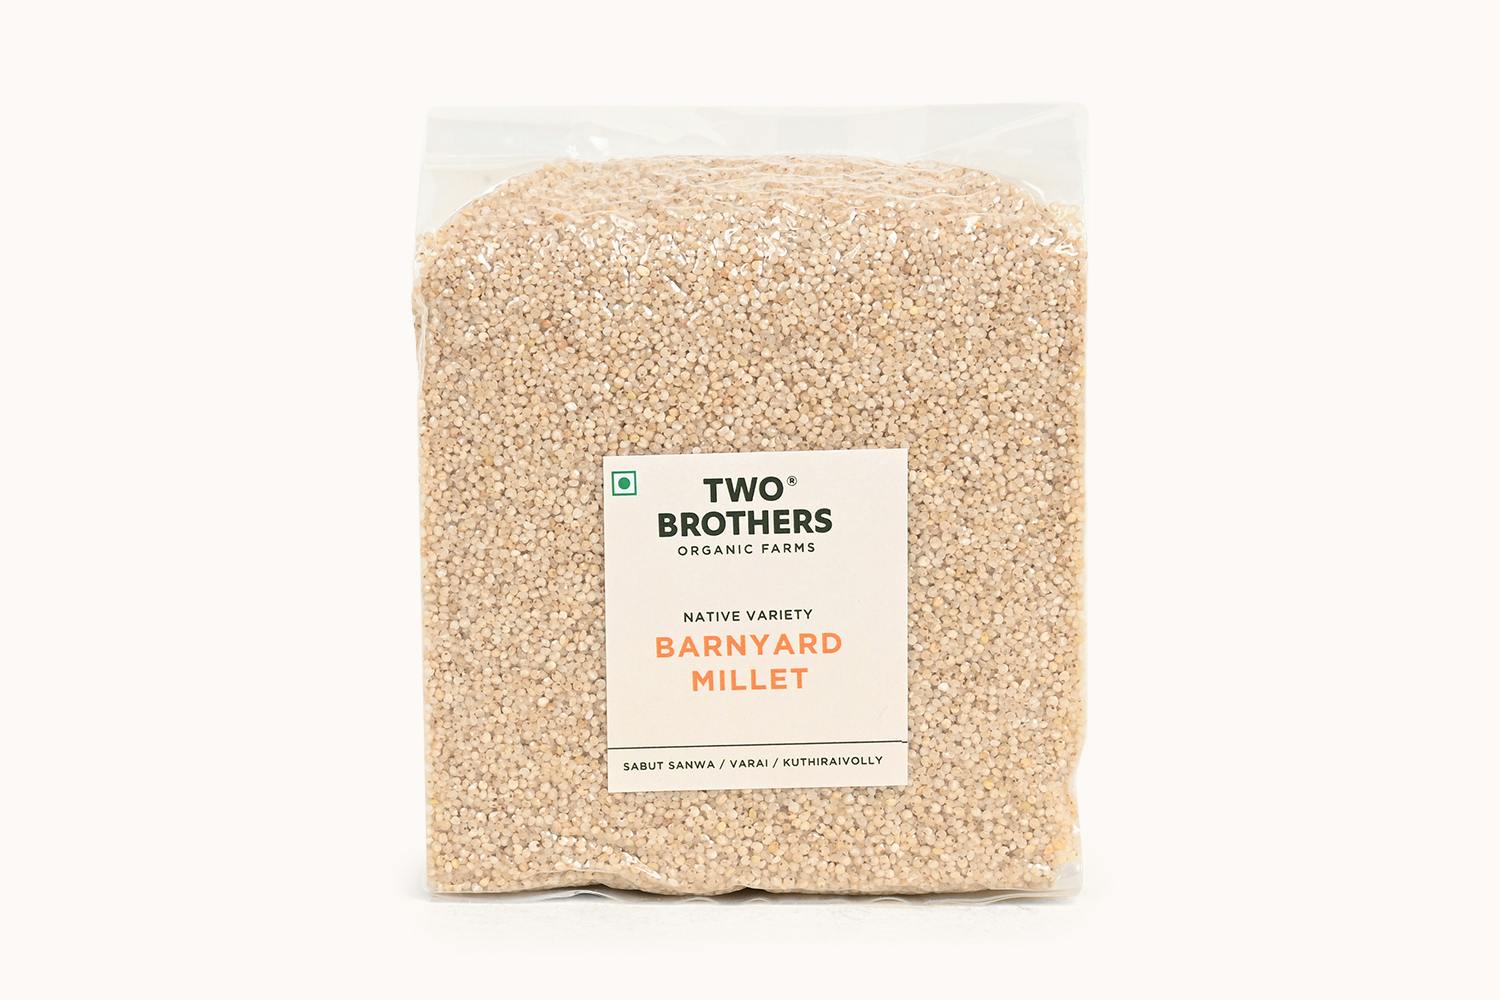 Two Brothers Barnyard Millet